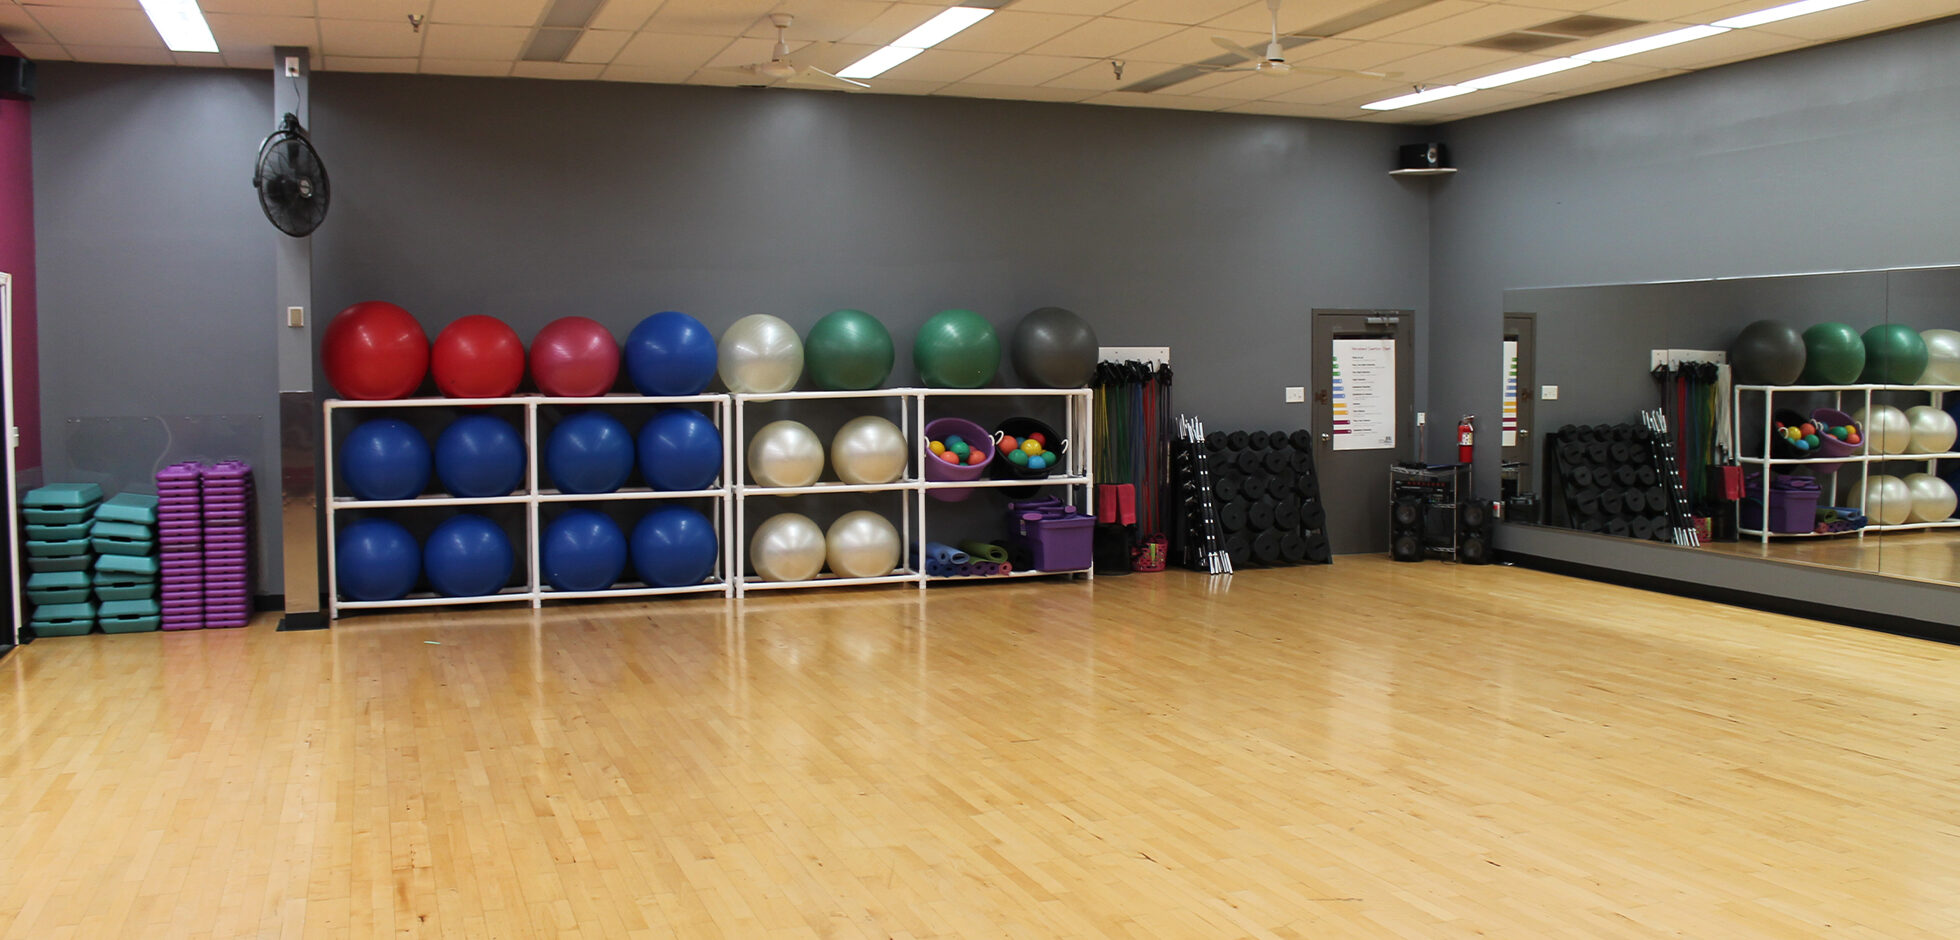 A Gym Near Wind Lake That Can Help With Exercising & Weight Loss